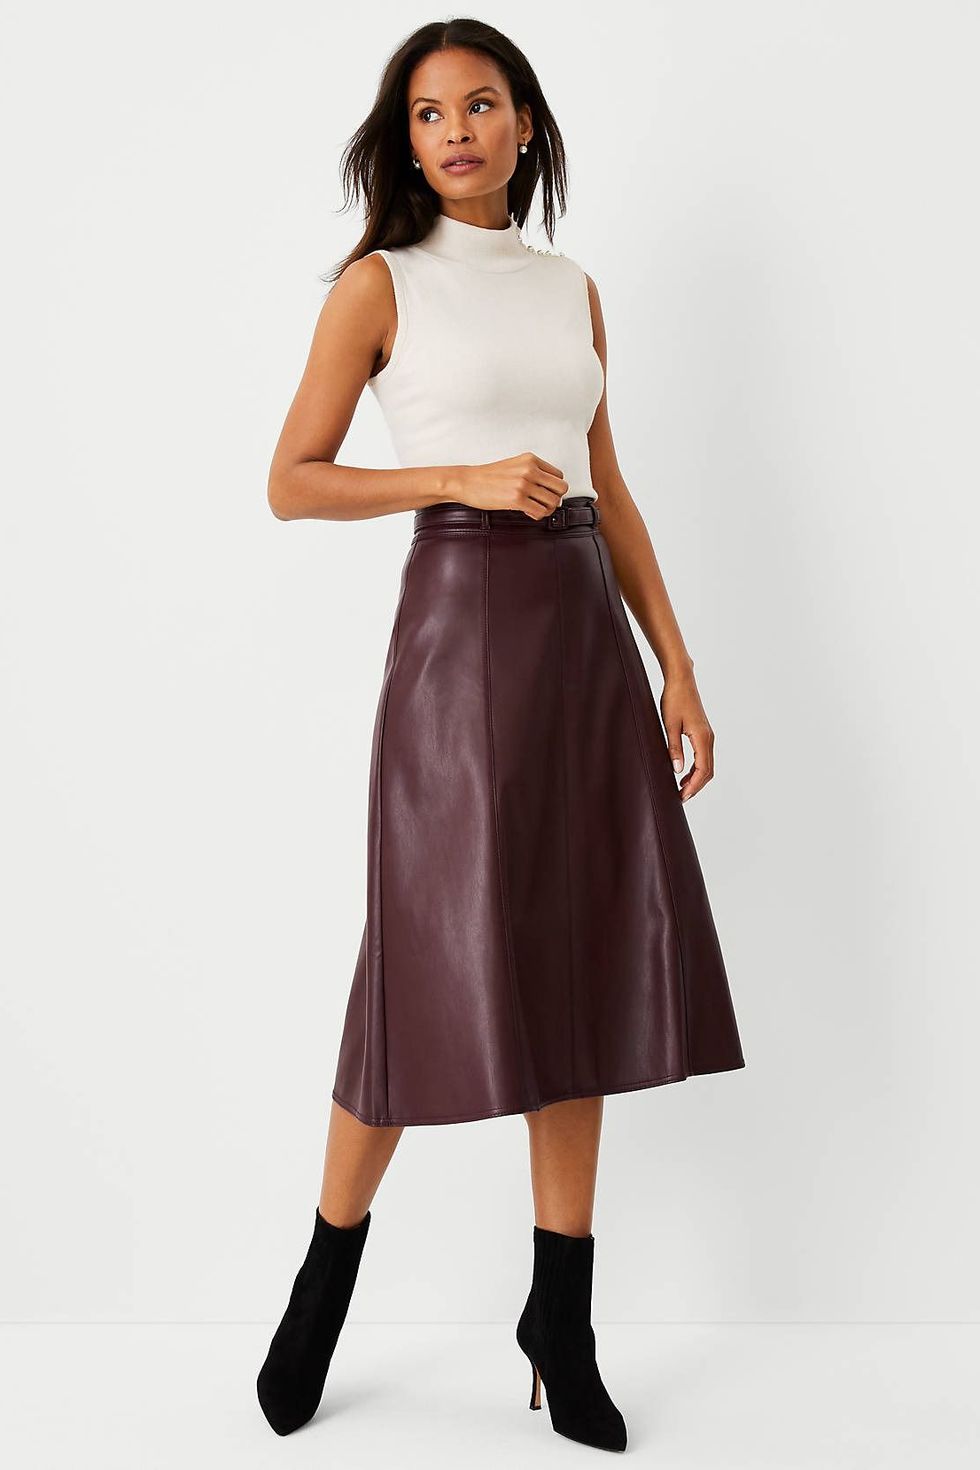 Long Skirt Outfits: How To Style Maxis & Midis This Season - Lulus